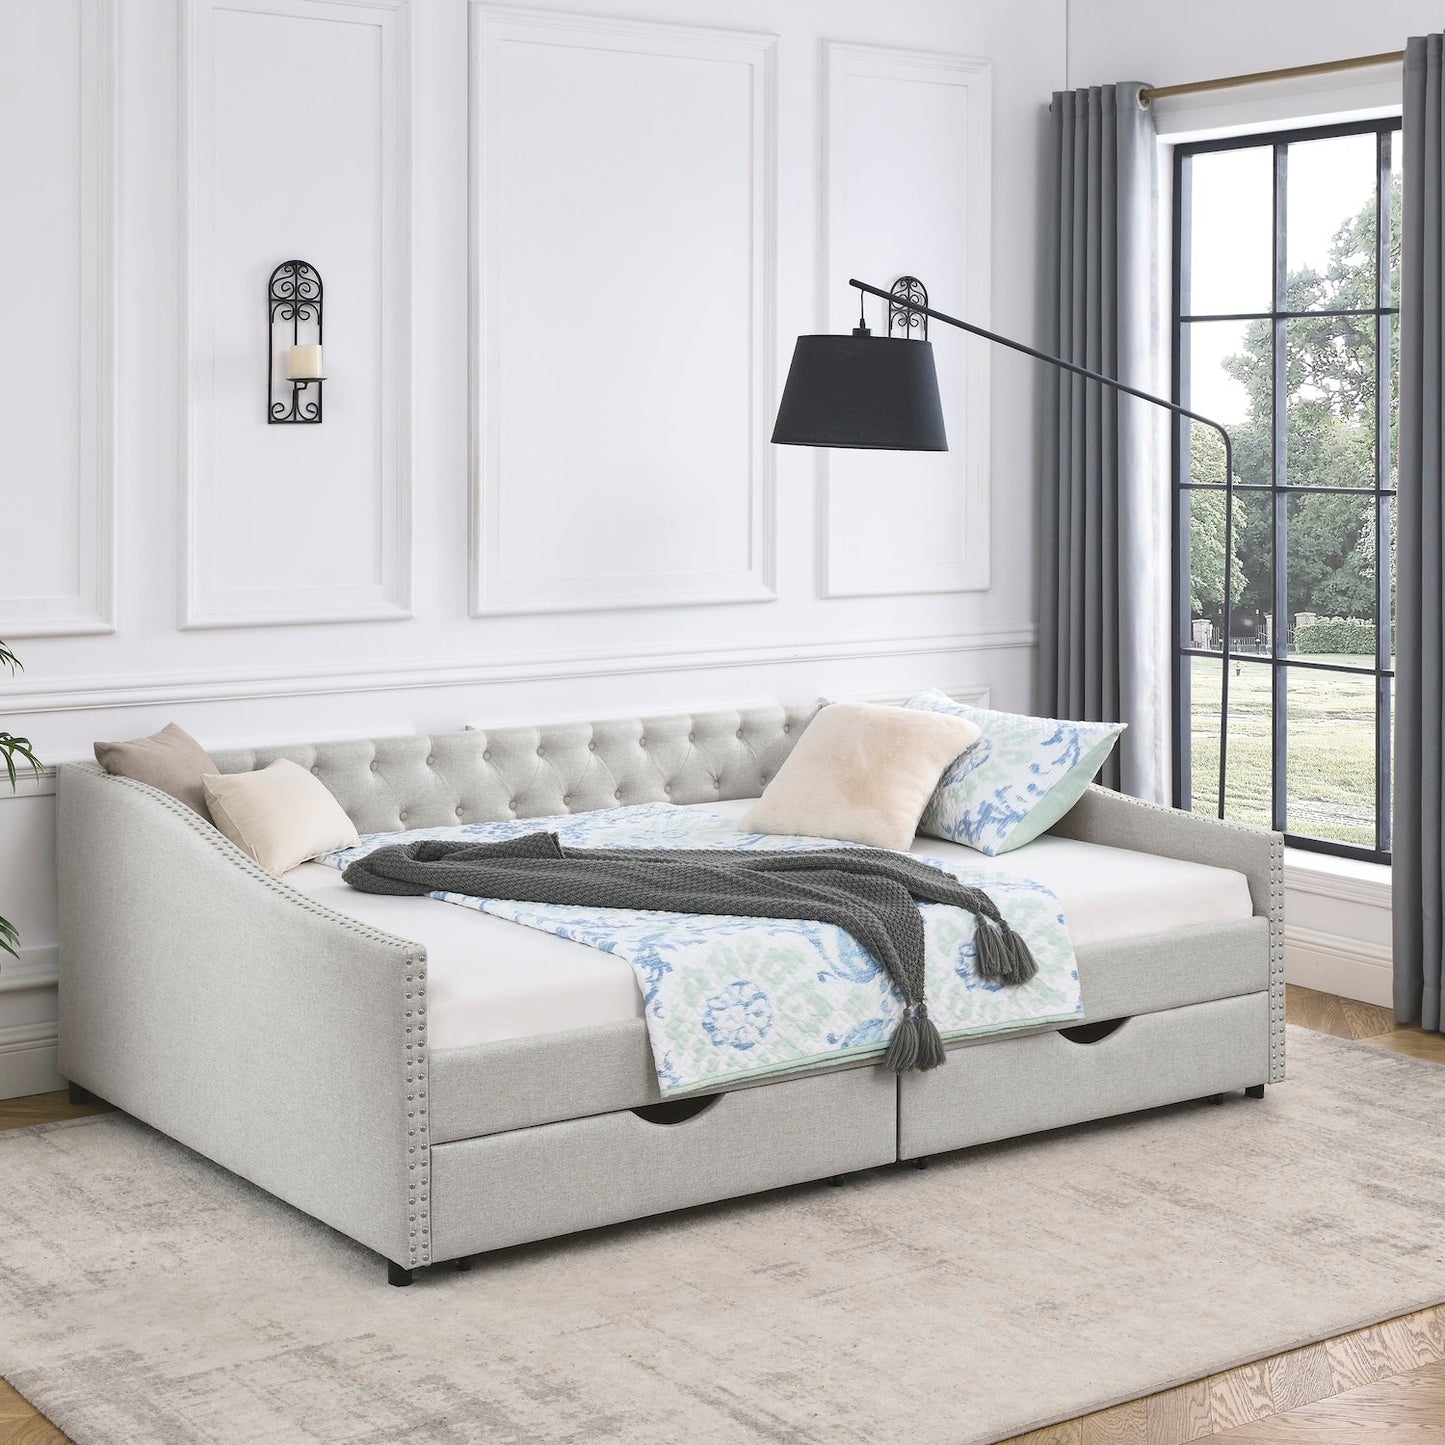 Everest Full Size Tufted Daybed with Storage